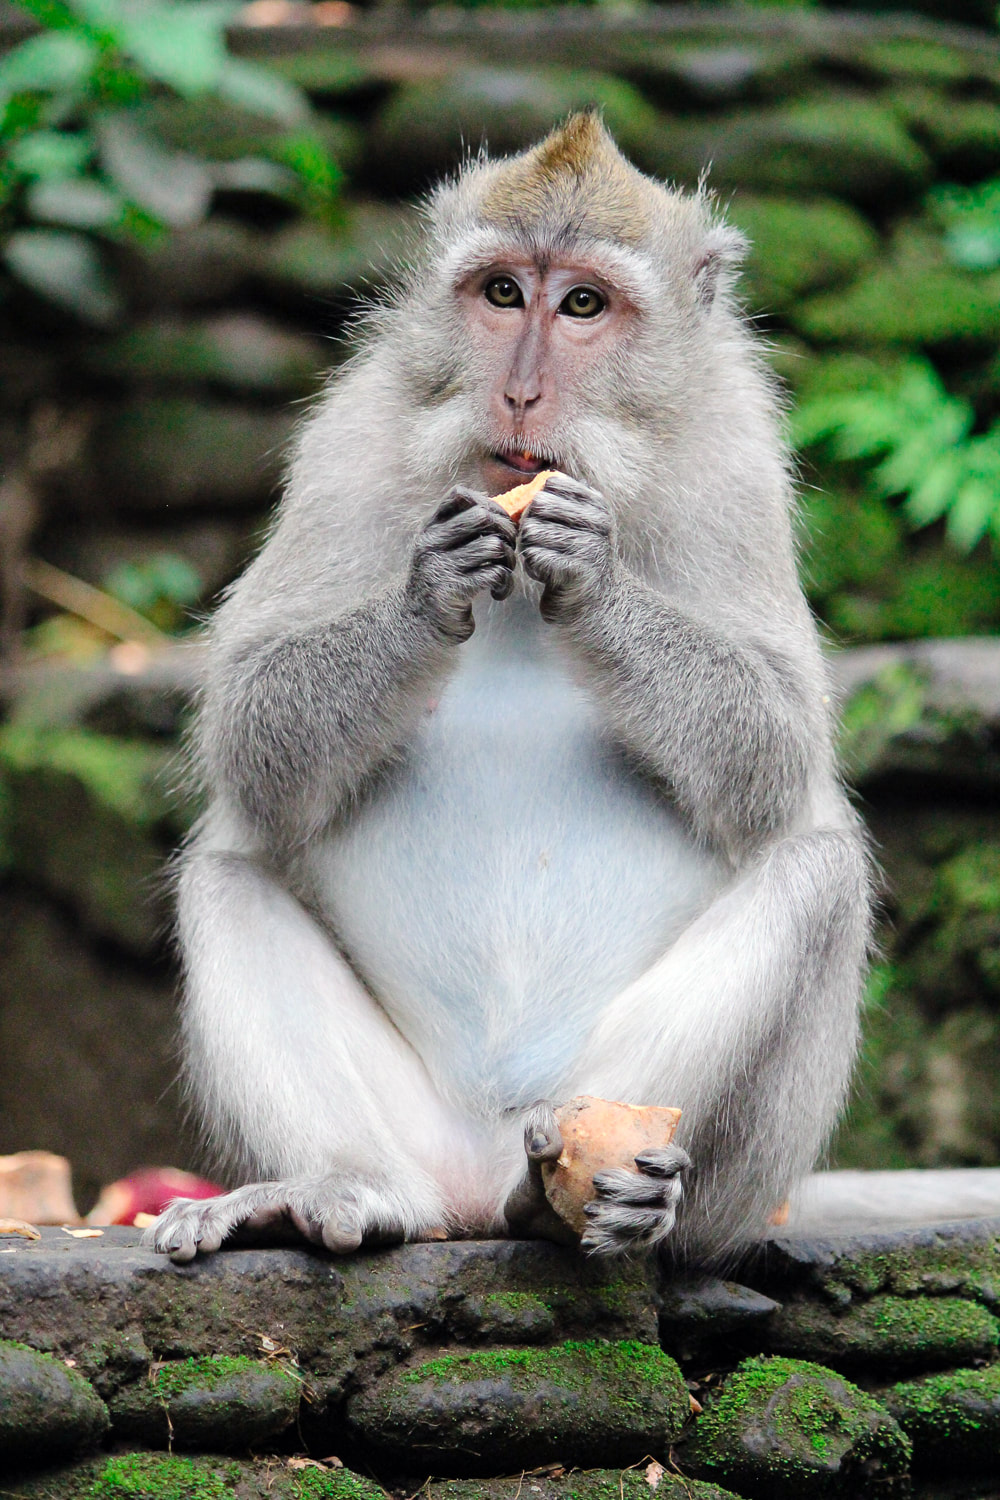 A baby Grey-haired, long-tail, macaque. Dinner time (Papaya) at the Sacred Monkey Forest Sanctuary, Ubud, Bali, Indonesia.